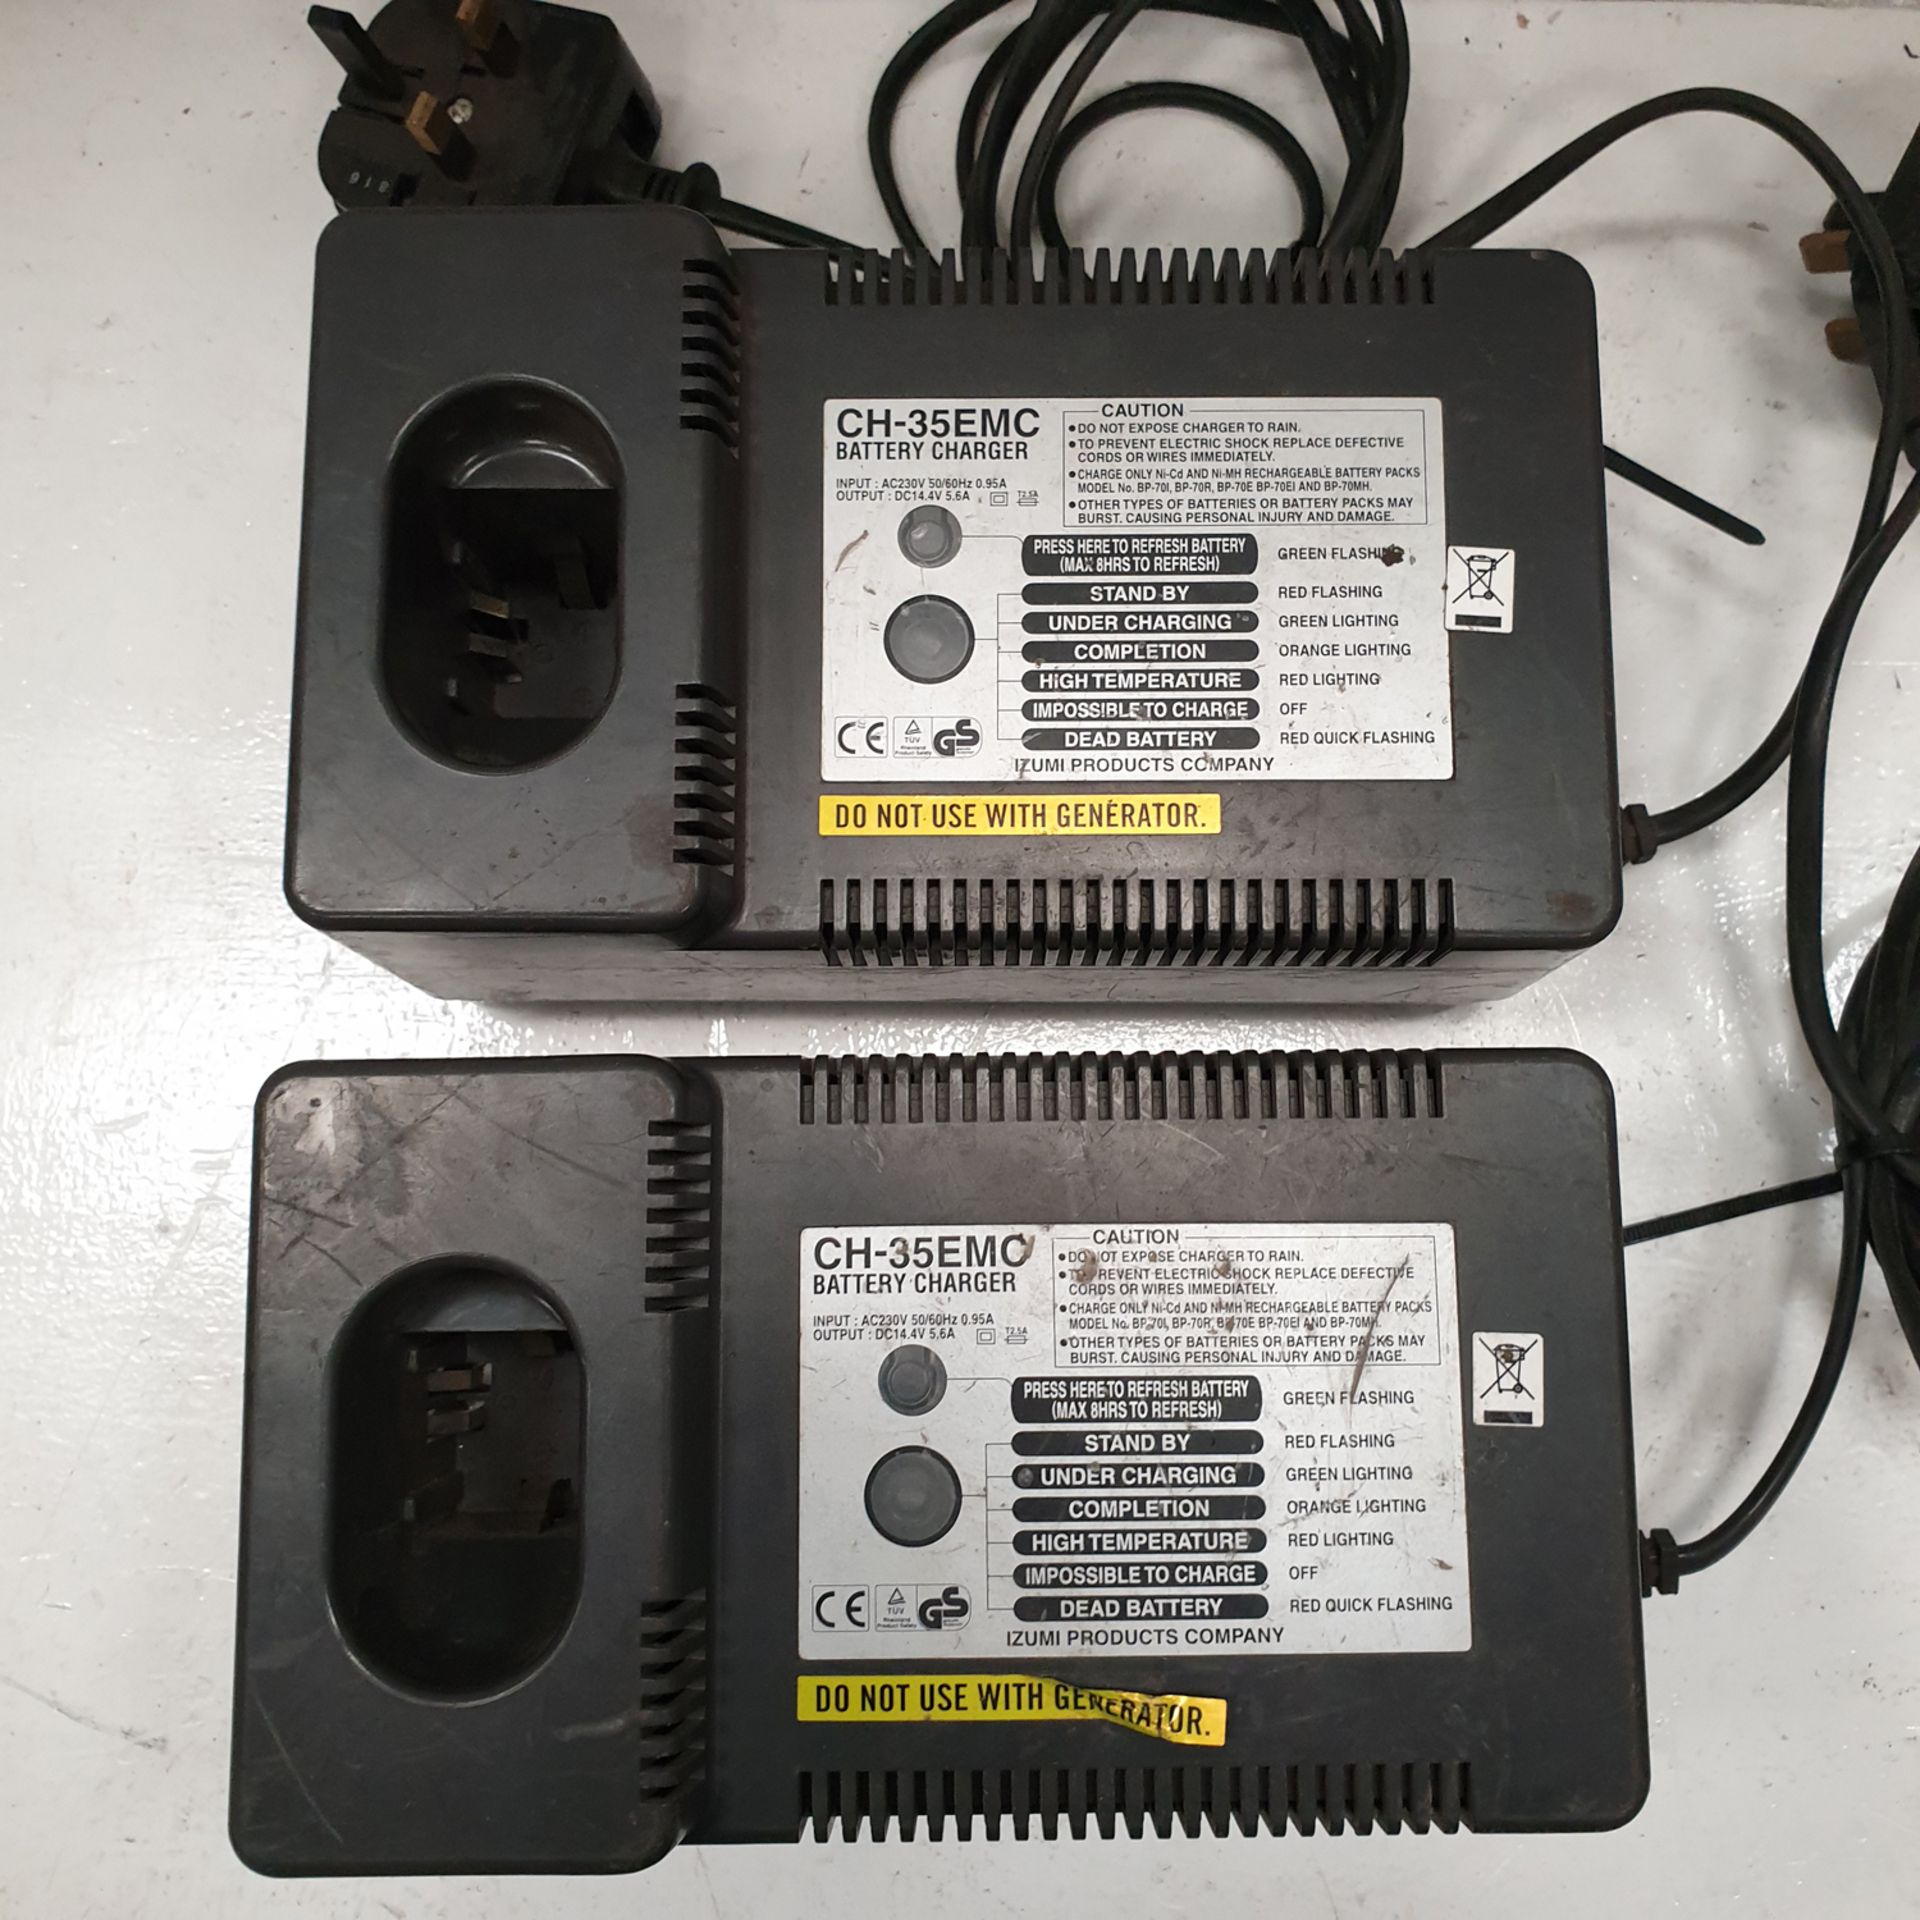 2 x CH-35EMC Battery Chargers. 230 Volts. - Image 2 of 3